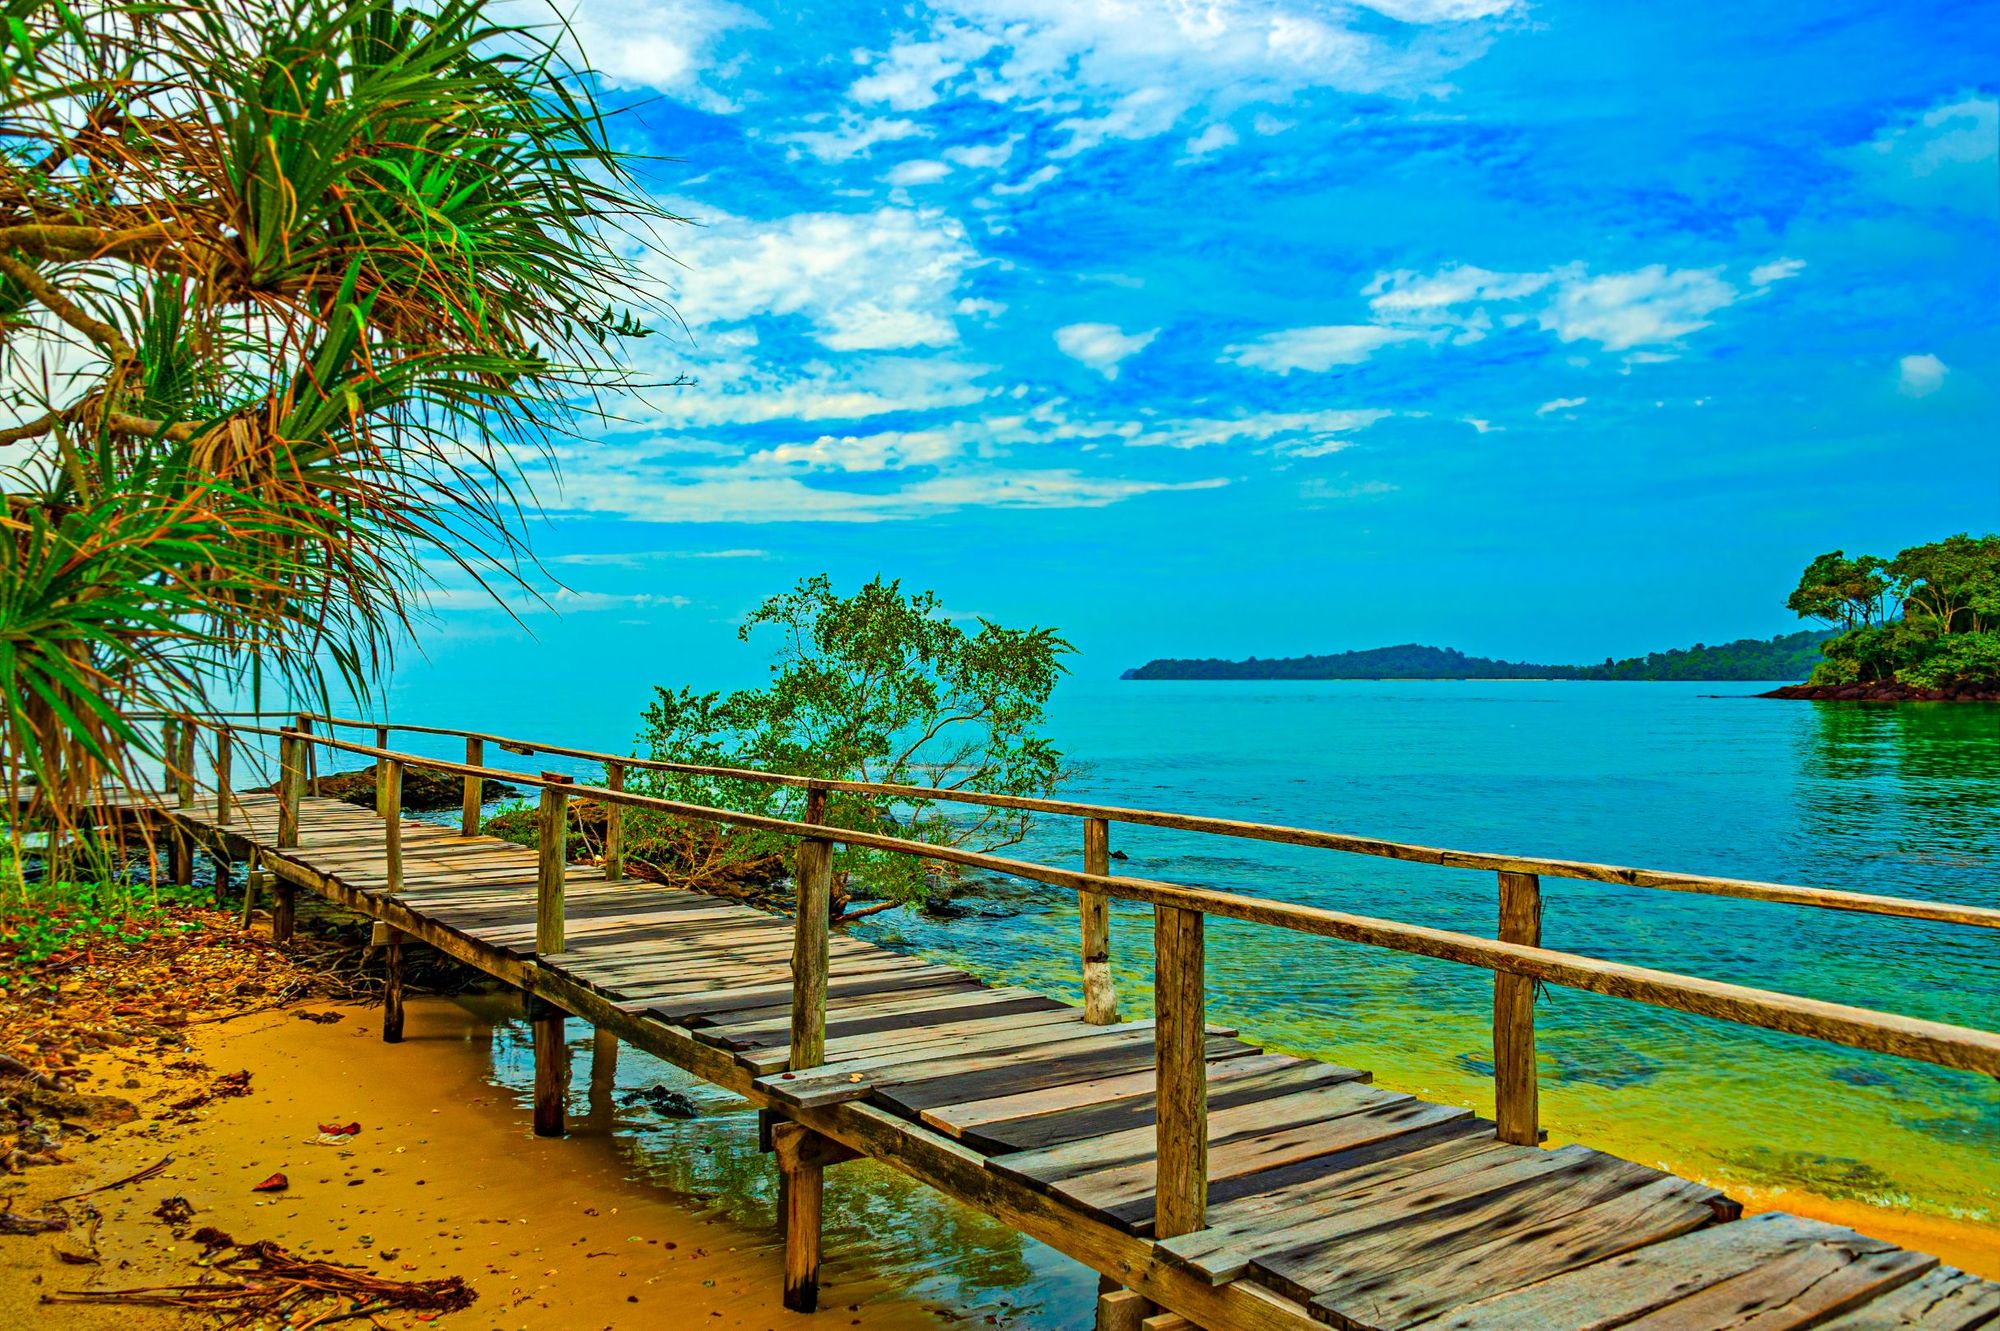 Ream National Park, a national park of Cambodia located near the city of Sihanoukville in southwestern Cambodia. Photo: Getty